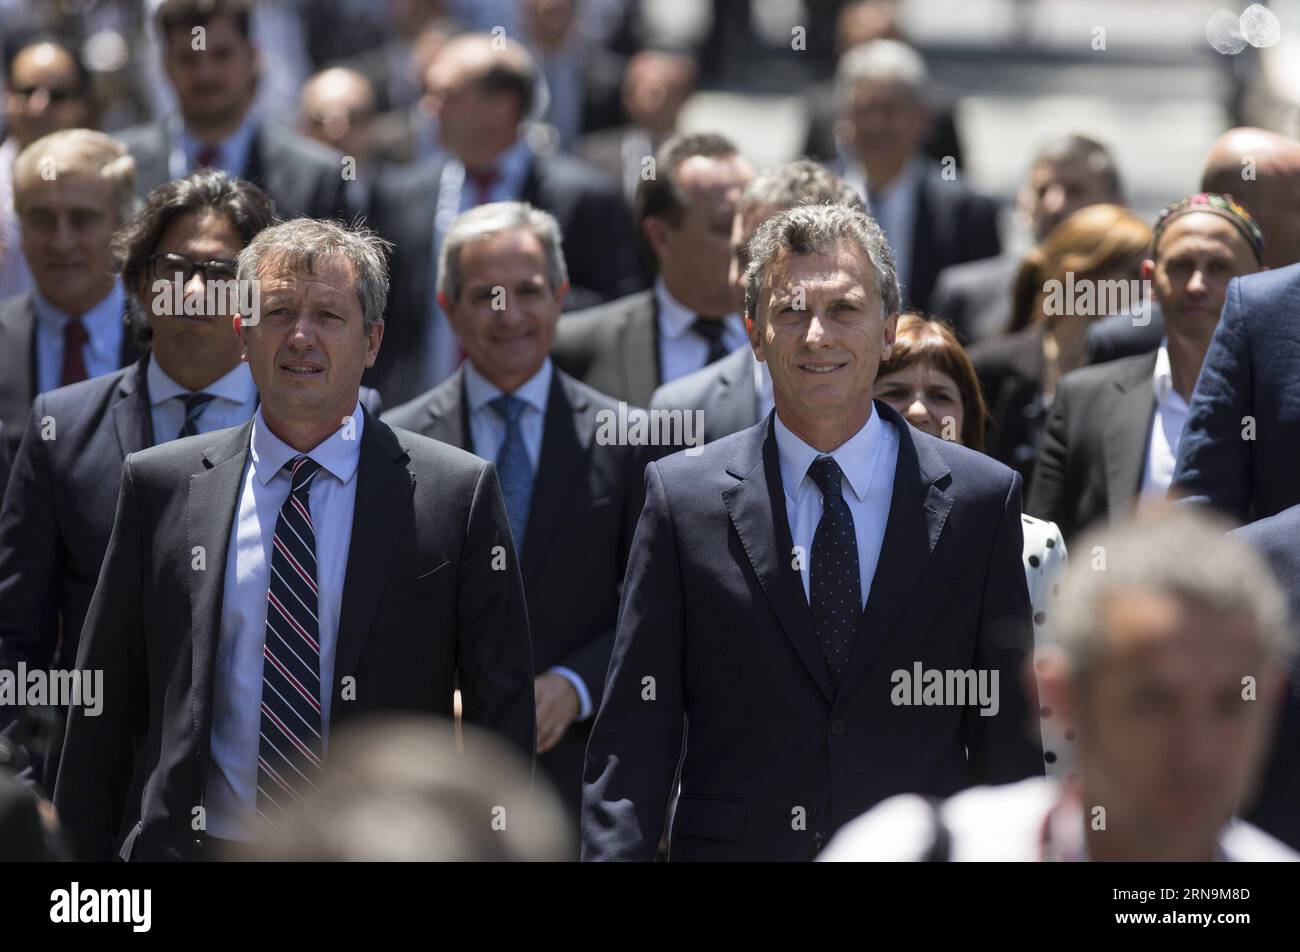 (151211) -- BUENOS AIRES, Dec. 11, 2015 -- Argentina s President Mauricio Macri (R, front) walks on May Avenue with his Cabinet to participate in the Tedeum at the Metropolitan Cathedral in Buenos Aires, capital of Argentina, Dec. 11, 2015. According to local press, Mauricio Macri Friday attended the traditional religious service at the Metropolital Cathedral, the day after his pesidential inauguration. Martin Zabala) (jg) (fnc) ARGENTINA-BUENOS AIRES-POLITICS-PRESIDENT e MARTINxZABALA PUBLICATIONxNOTxINxCHN   151211 Buenos Aires DEC 11 2015 Argentina S President Mauricio Macri r Front Walks O Stock Photo